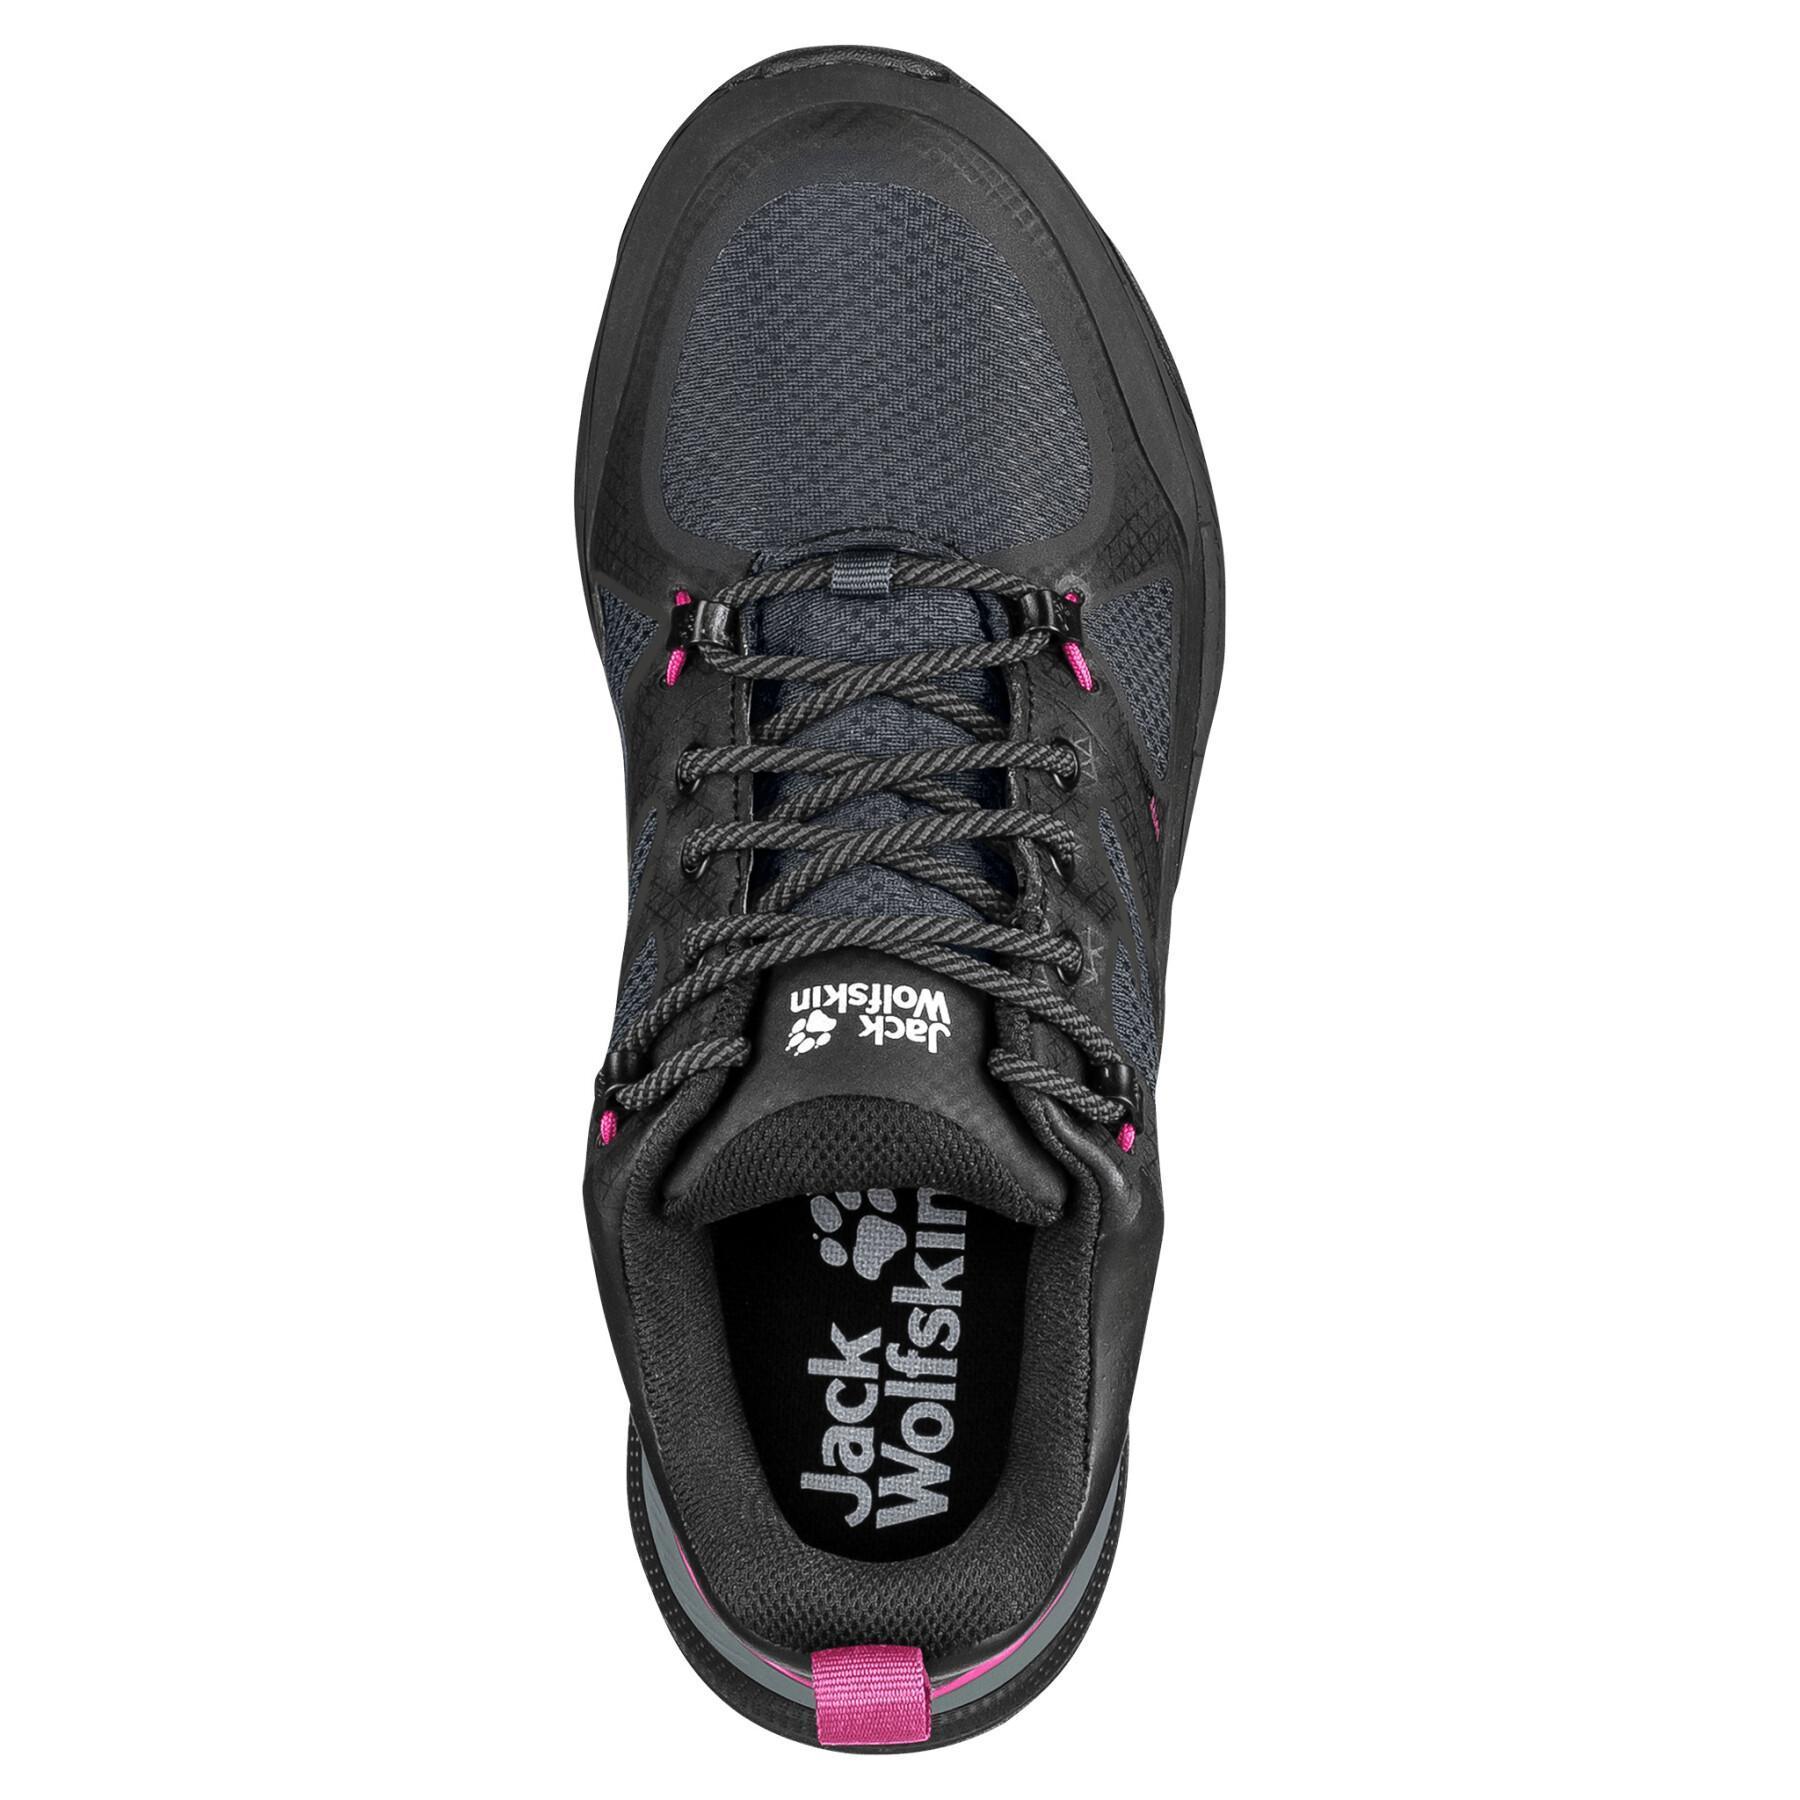 Low hiking shoes for women Jack Wolfskin force striker texapore